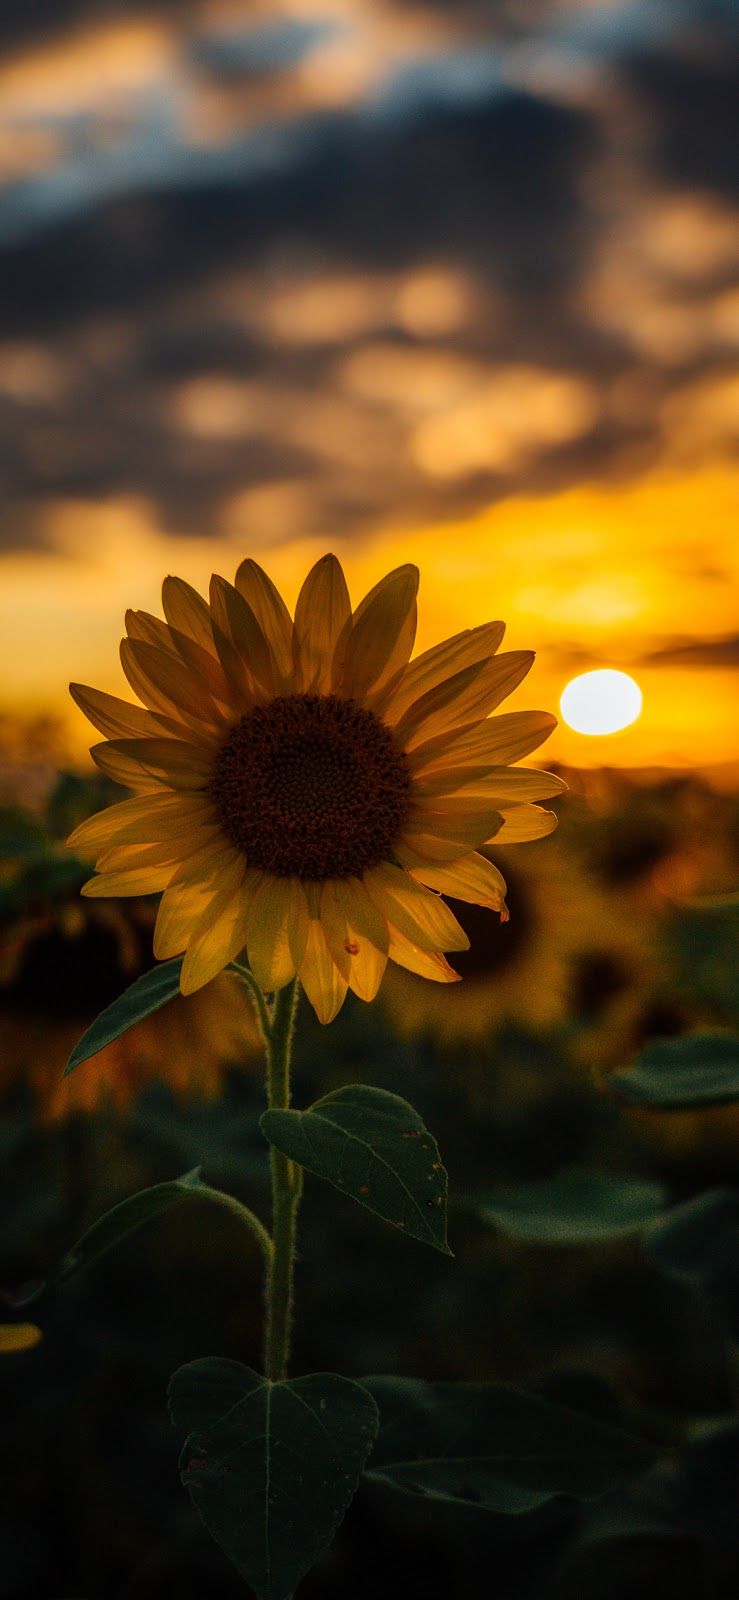 Sunflower Iphone Wallpapers